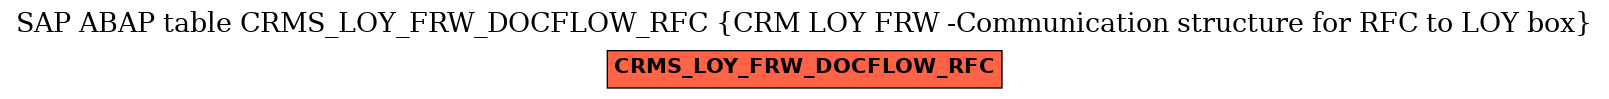 E-R Diagram for table CRMS_LOY_FRW_DOCFLOW_RFC (CRM LOY FRW -Communication structure for RFC to LOY box)